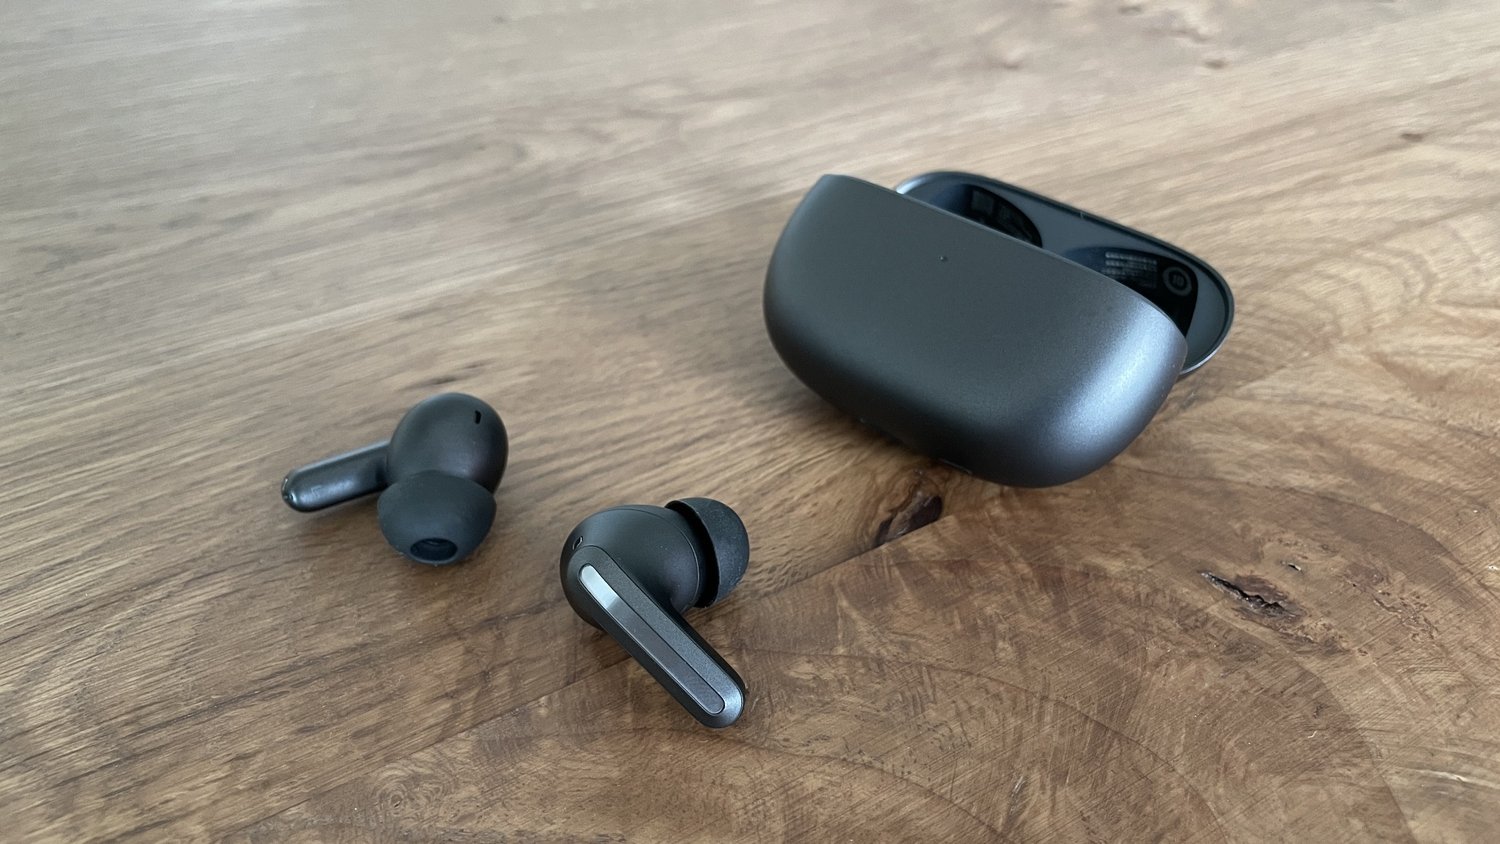 Xiaomi Buds 4 Pro vs Redmi Buds 4 Pro: What are the key differences? -  Dignited